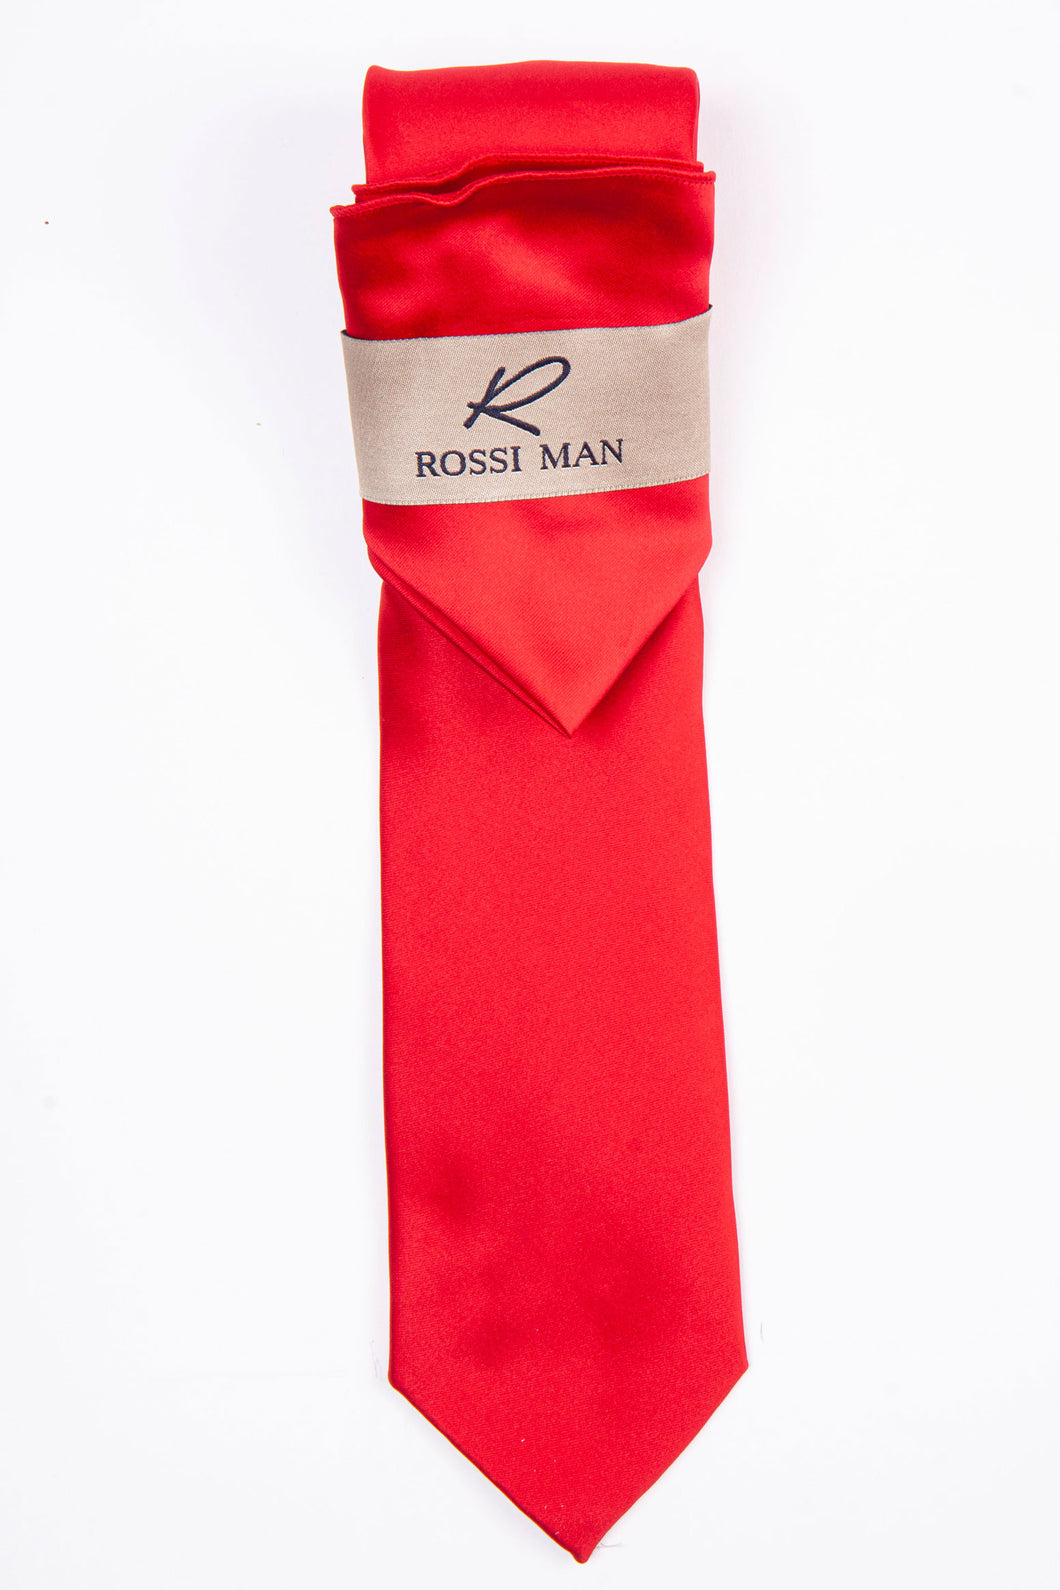 Rossi Man Tie and Pocket Round - RMR665-3